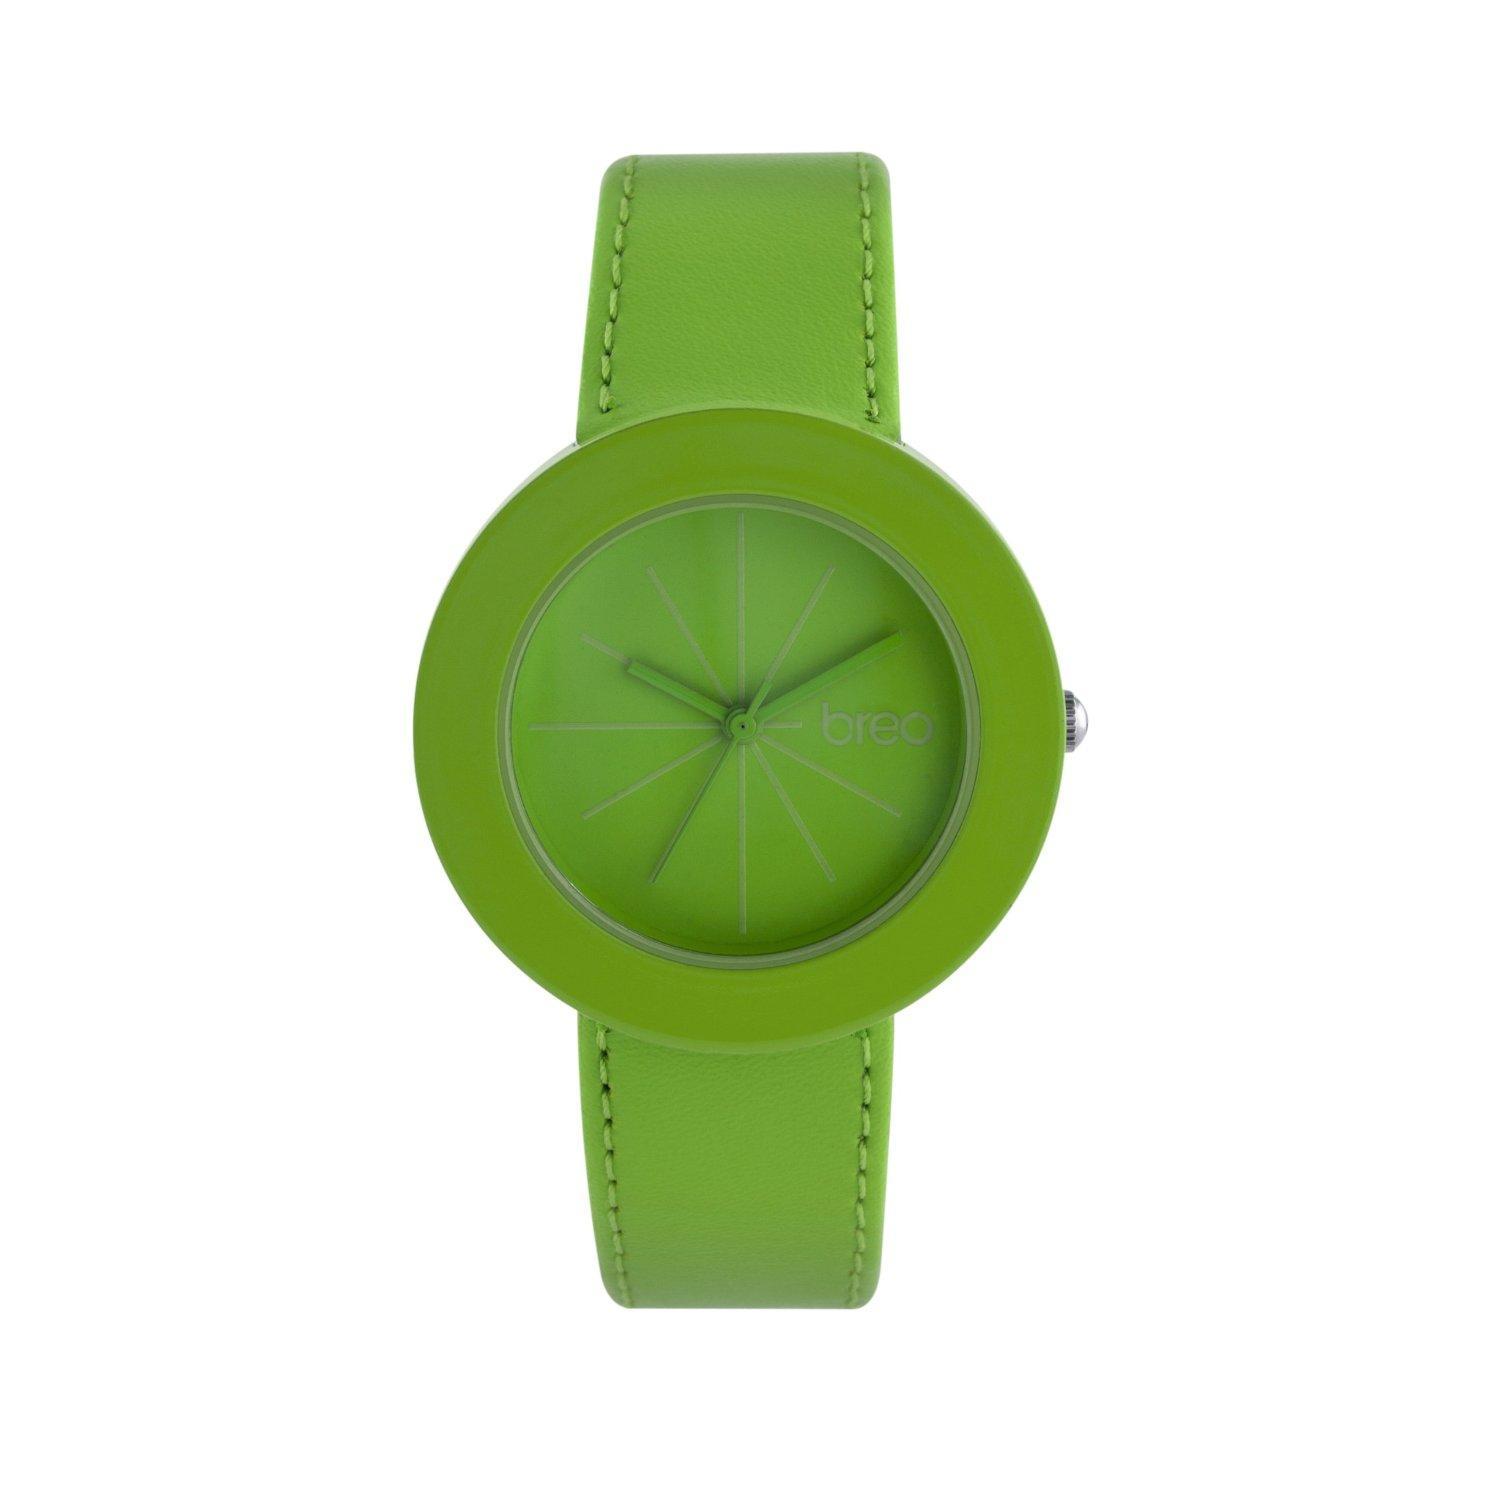 Foto Breo Lima LM5 Unisex Watch Green Leather Strap & Dial